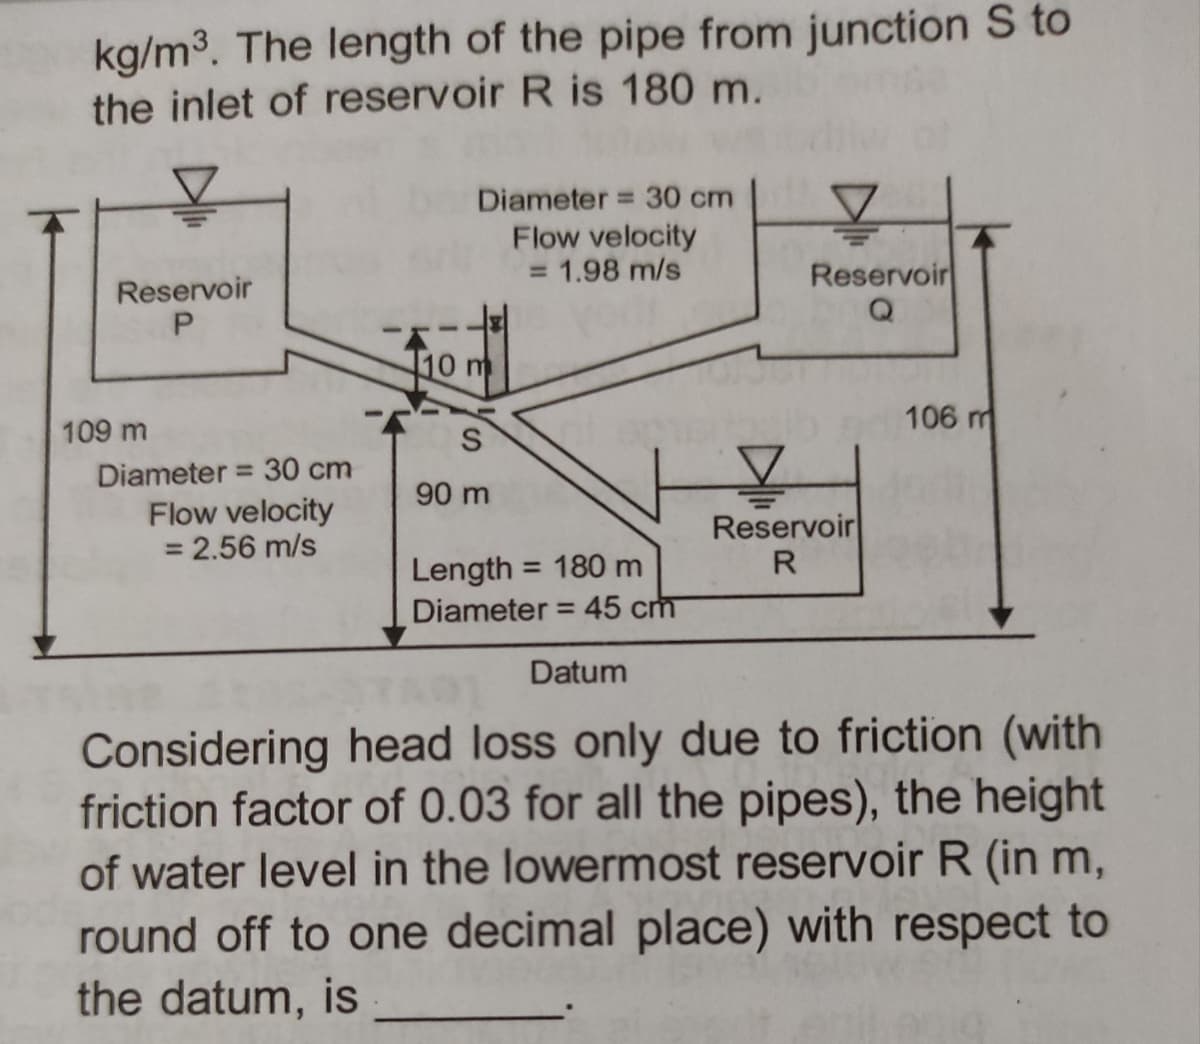 kg/m³. The length of the pipe from junction S to
the inlet of reservoir R is 180 m.
Reservoir
P
109 m
Diameter = 30 cm
Flow velocity
= 2.56 m/s
Diameter 30 cm
Flow velocity
= 1.98 m/s
10 m
S
90 m
Length = 180 m
Diameter = 45 cm
Datum
Reservoir
Reservoir
R
106 m
Considering head loss only due to friction (with
friction factor of 0.03 for all the pipes), the height
of water level in the lowermost reservoir R (in m,
round off to one decimal place) with respect to
the datum, is